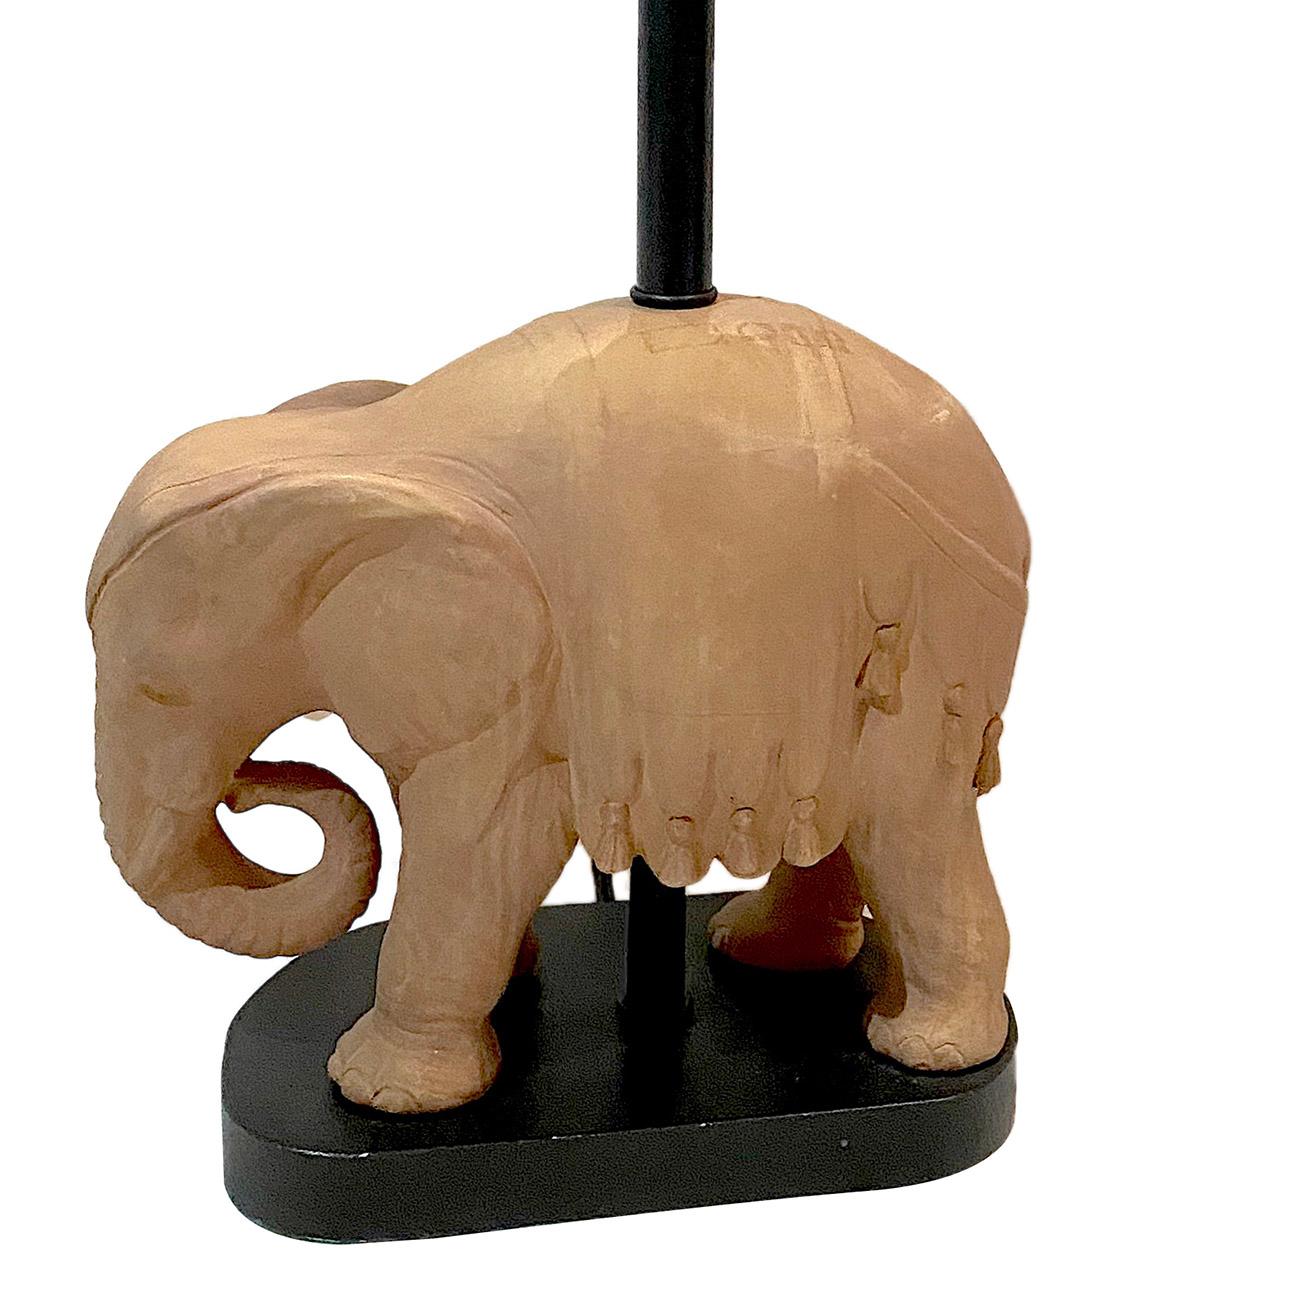 A circa 1950's French terracotta elephant table lamp with a wood base.

Measurements:
Height of body: 12